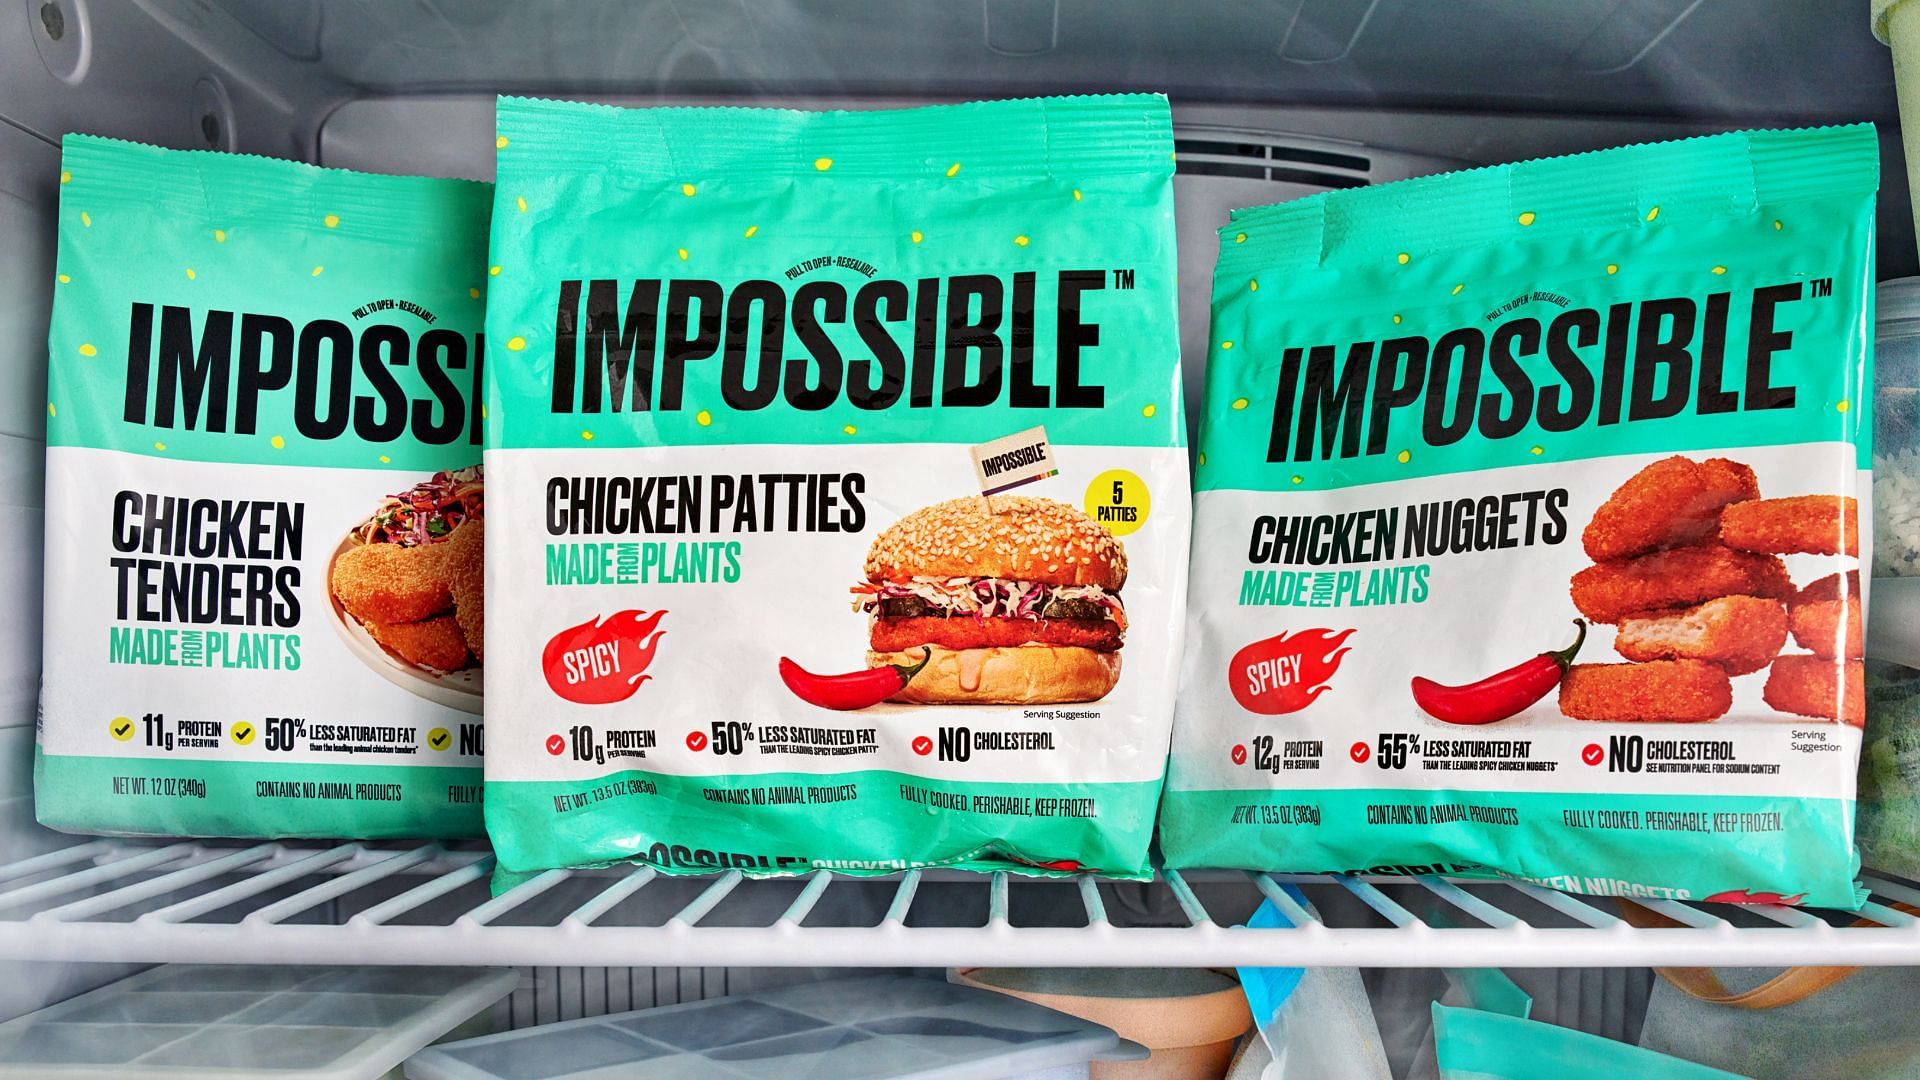 Impossible Foods introduces a new plant-based chicken product line-up for February 2023 (Image via Impossible Foods)